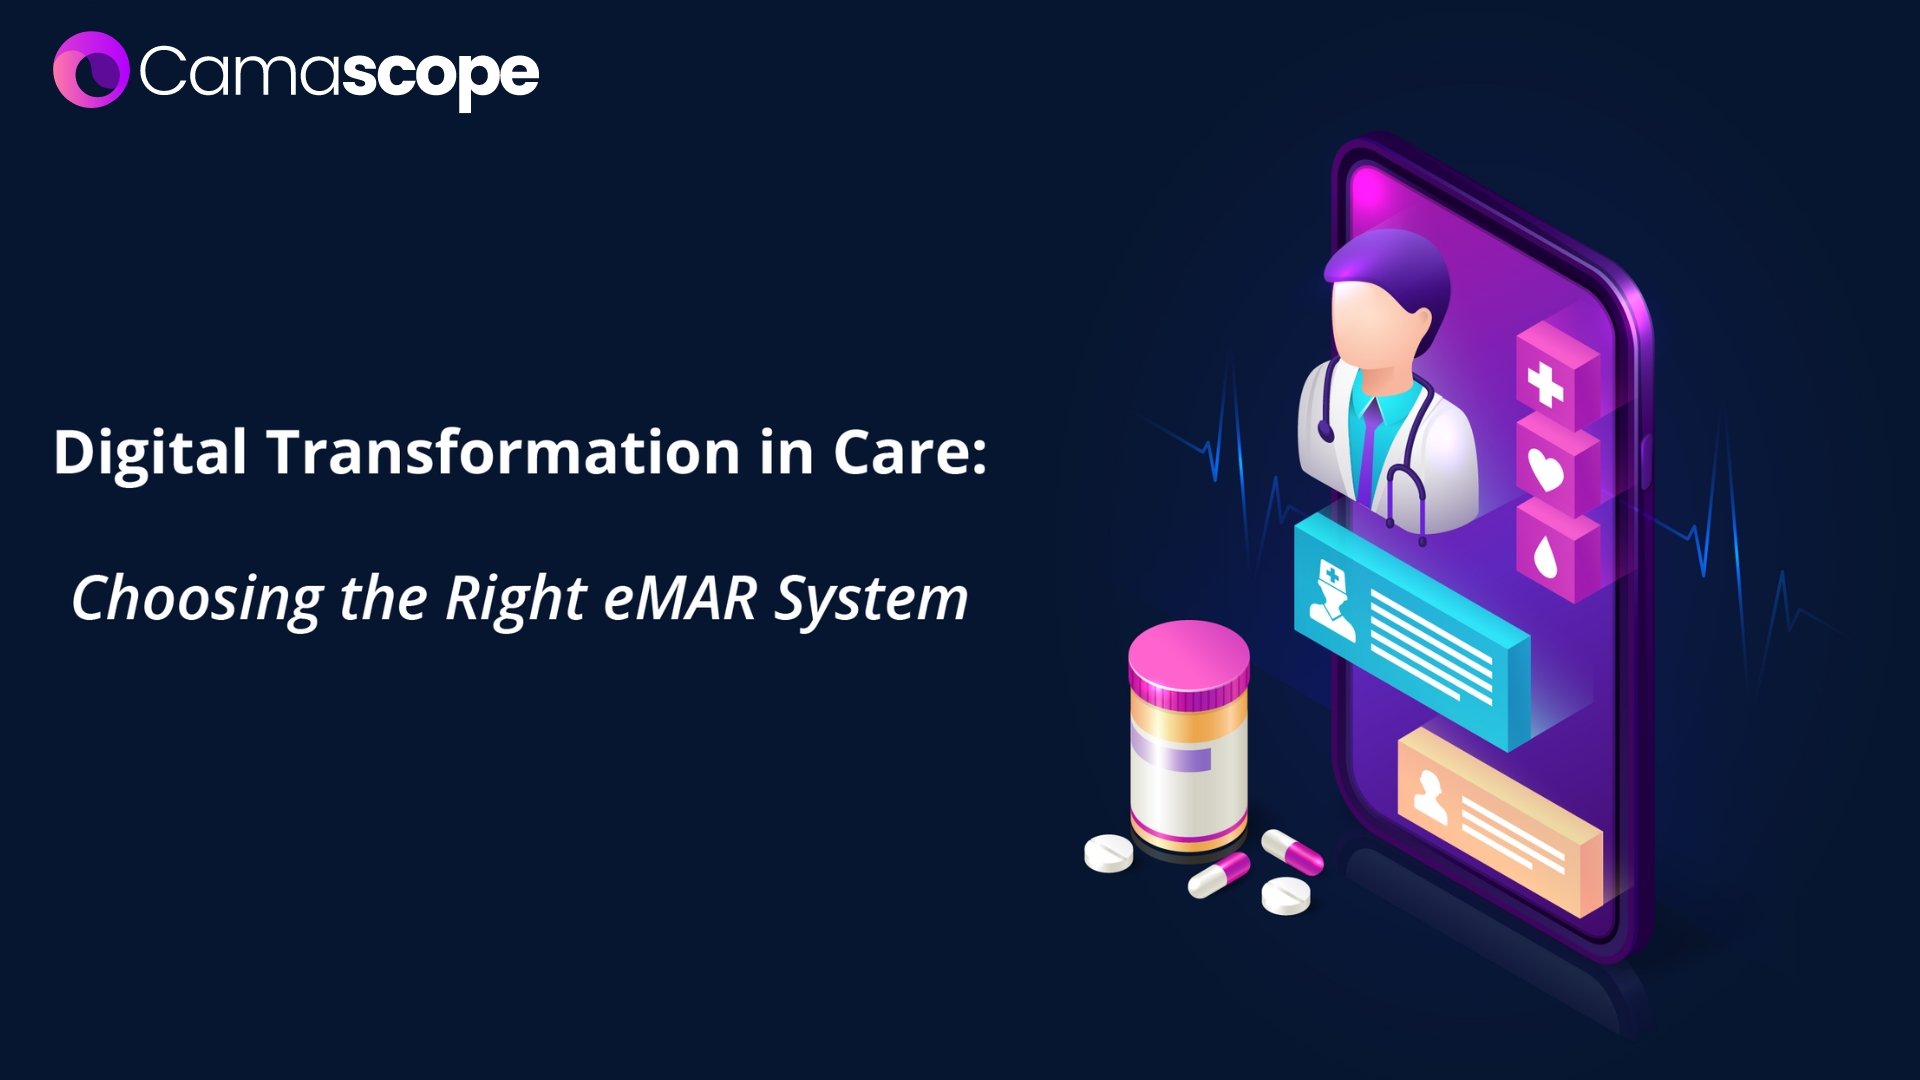 Digital Transformation in Care: Choosing the Right eMAR System